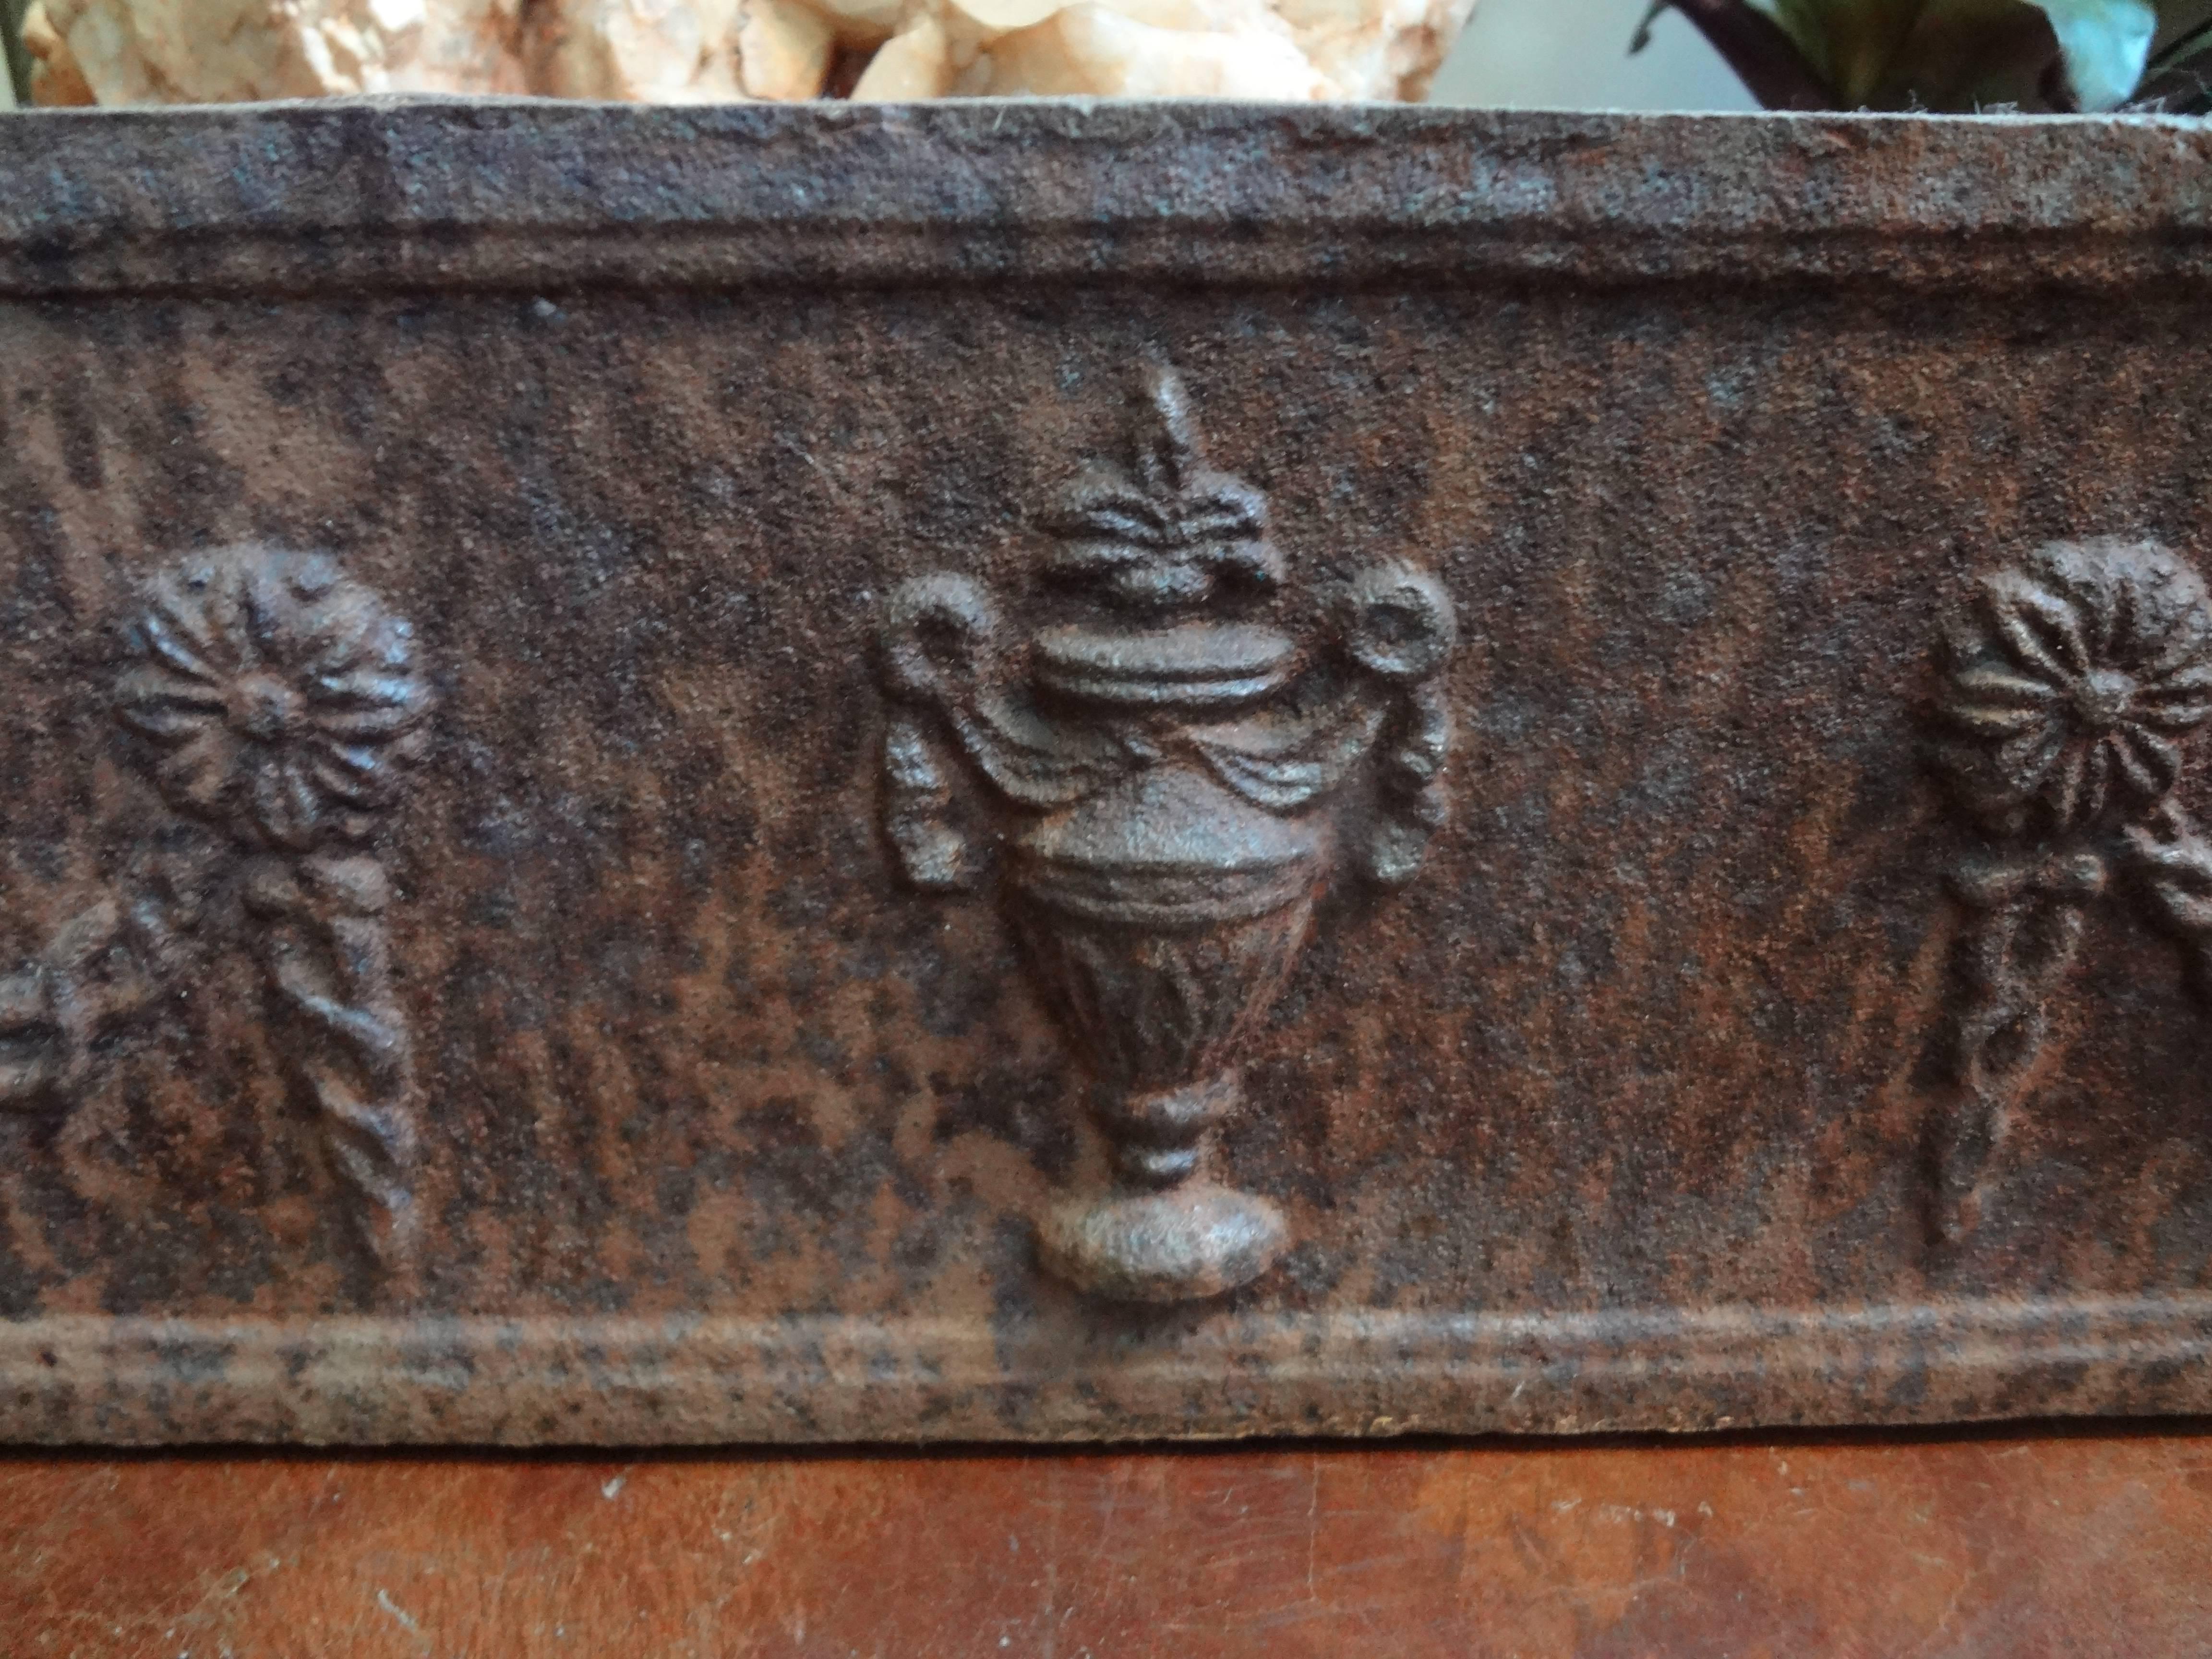 19th century French neoclassical style cast iron jardiniere or planter. This beautiful rectangular garden ornament is decorated on both sides and in great condition. Perfect for indoor or outdoor use.